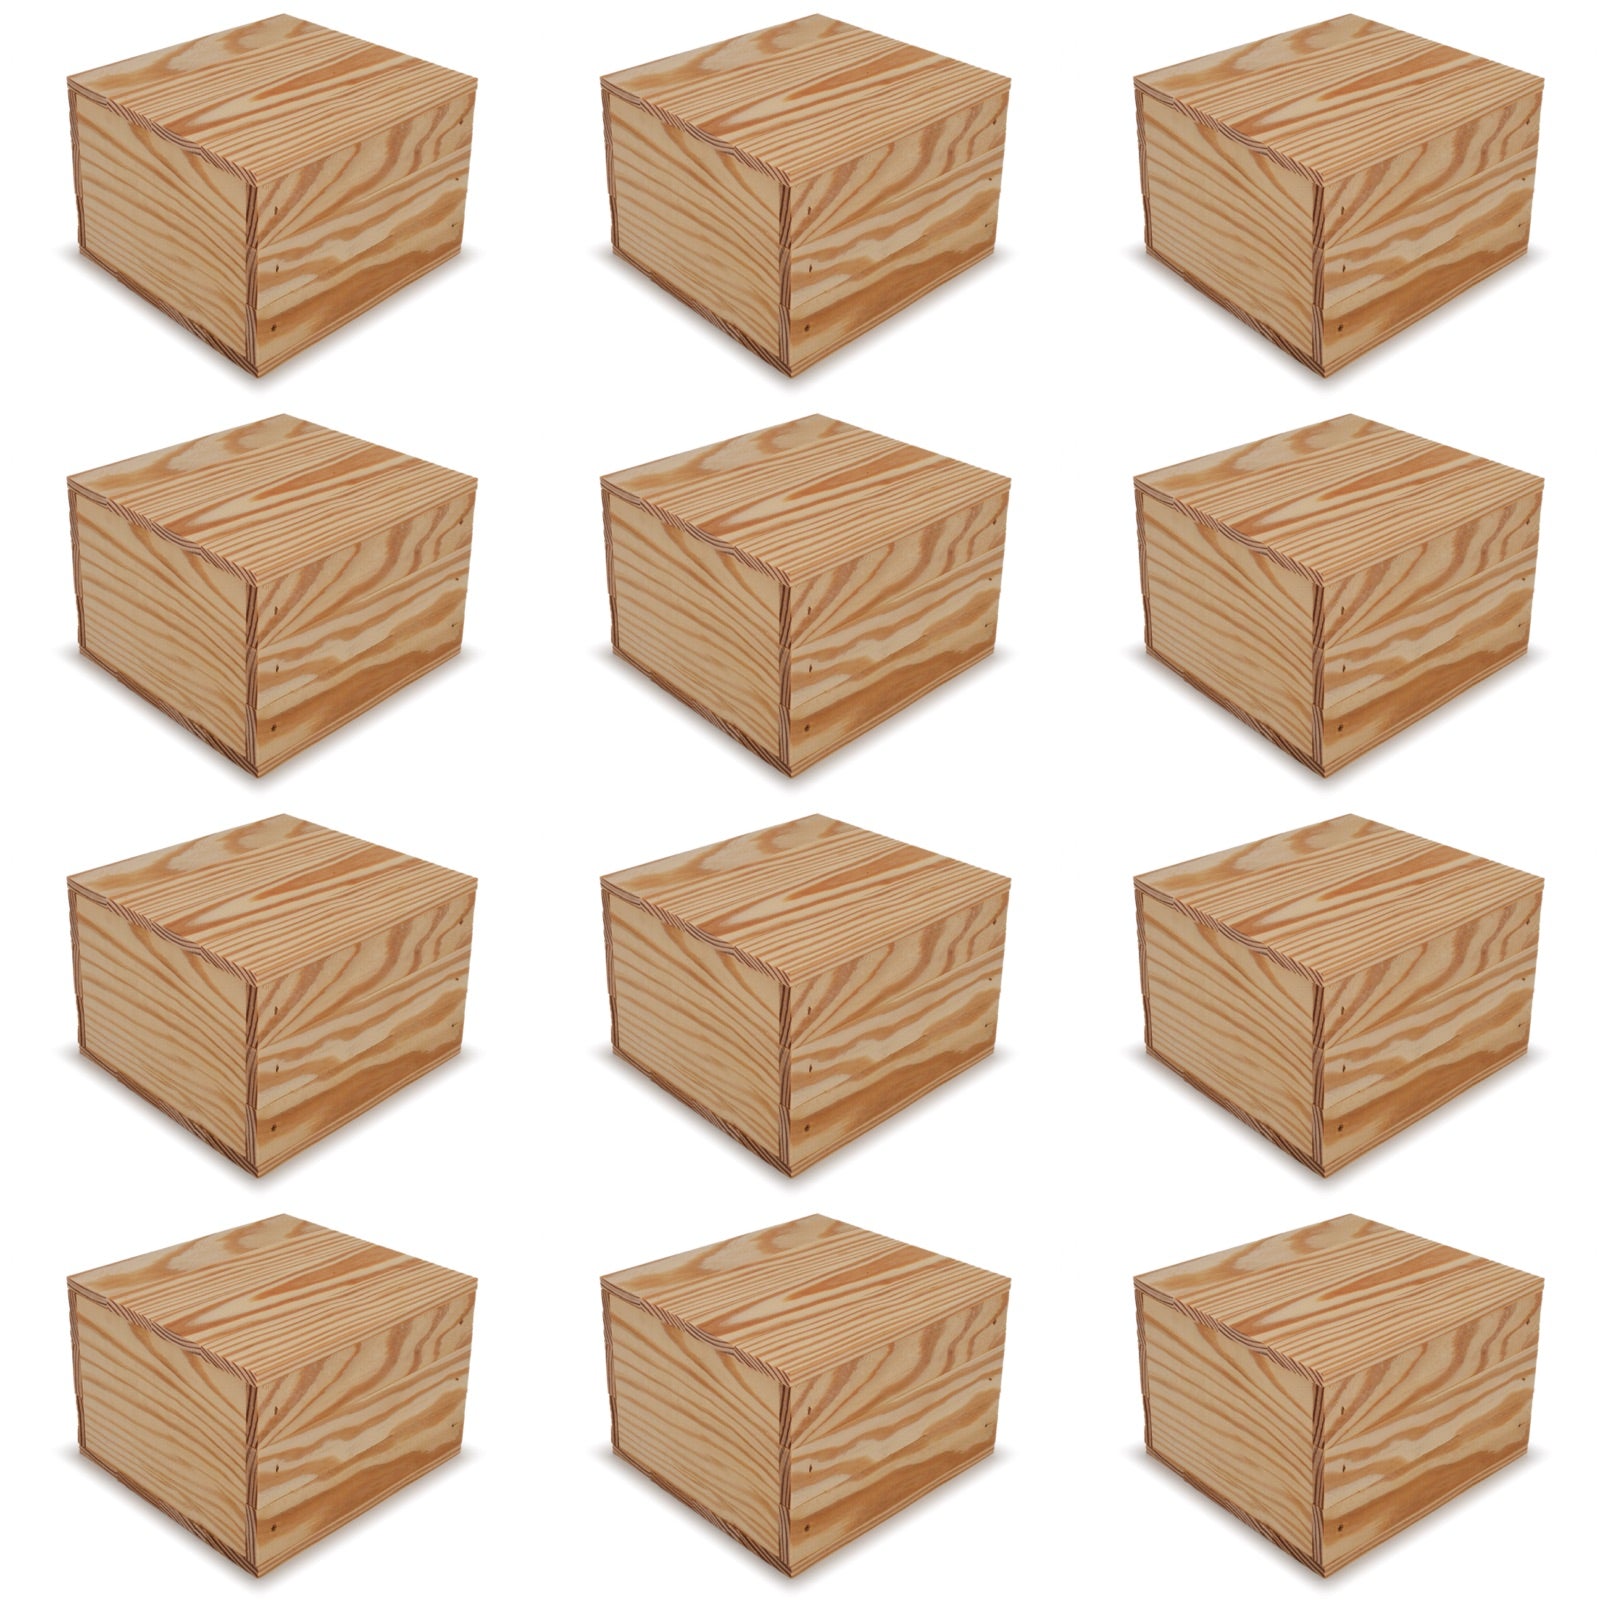 12 Small wooden crates with lid 6x6.25x5.25